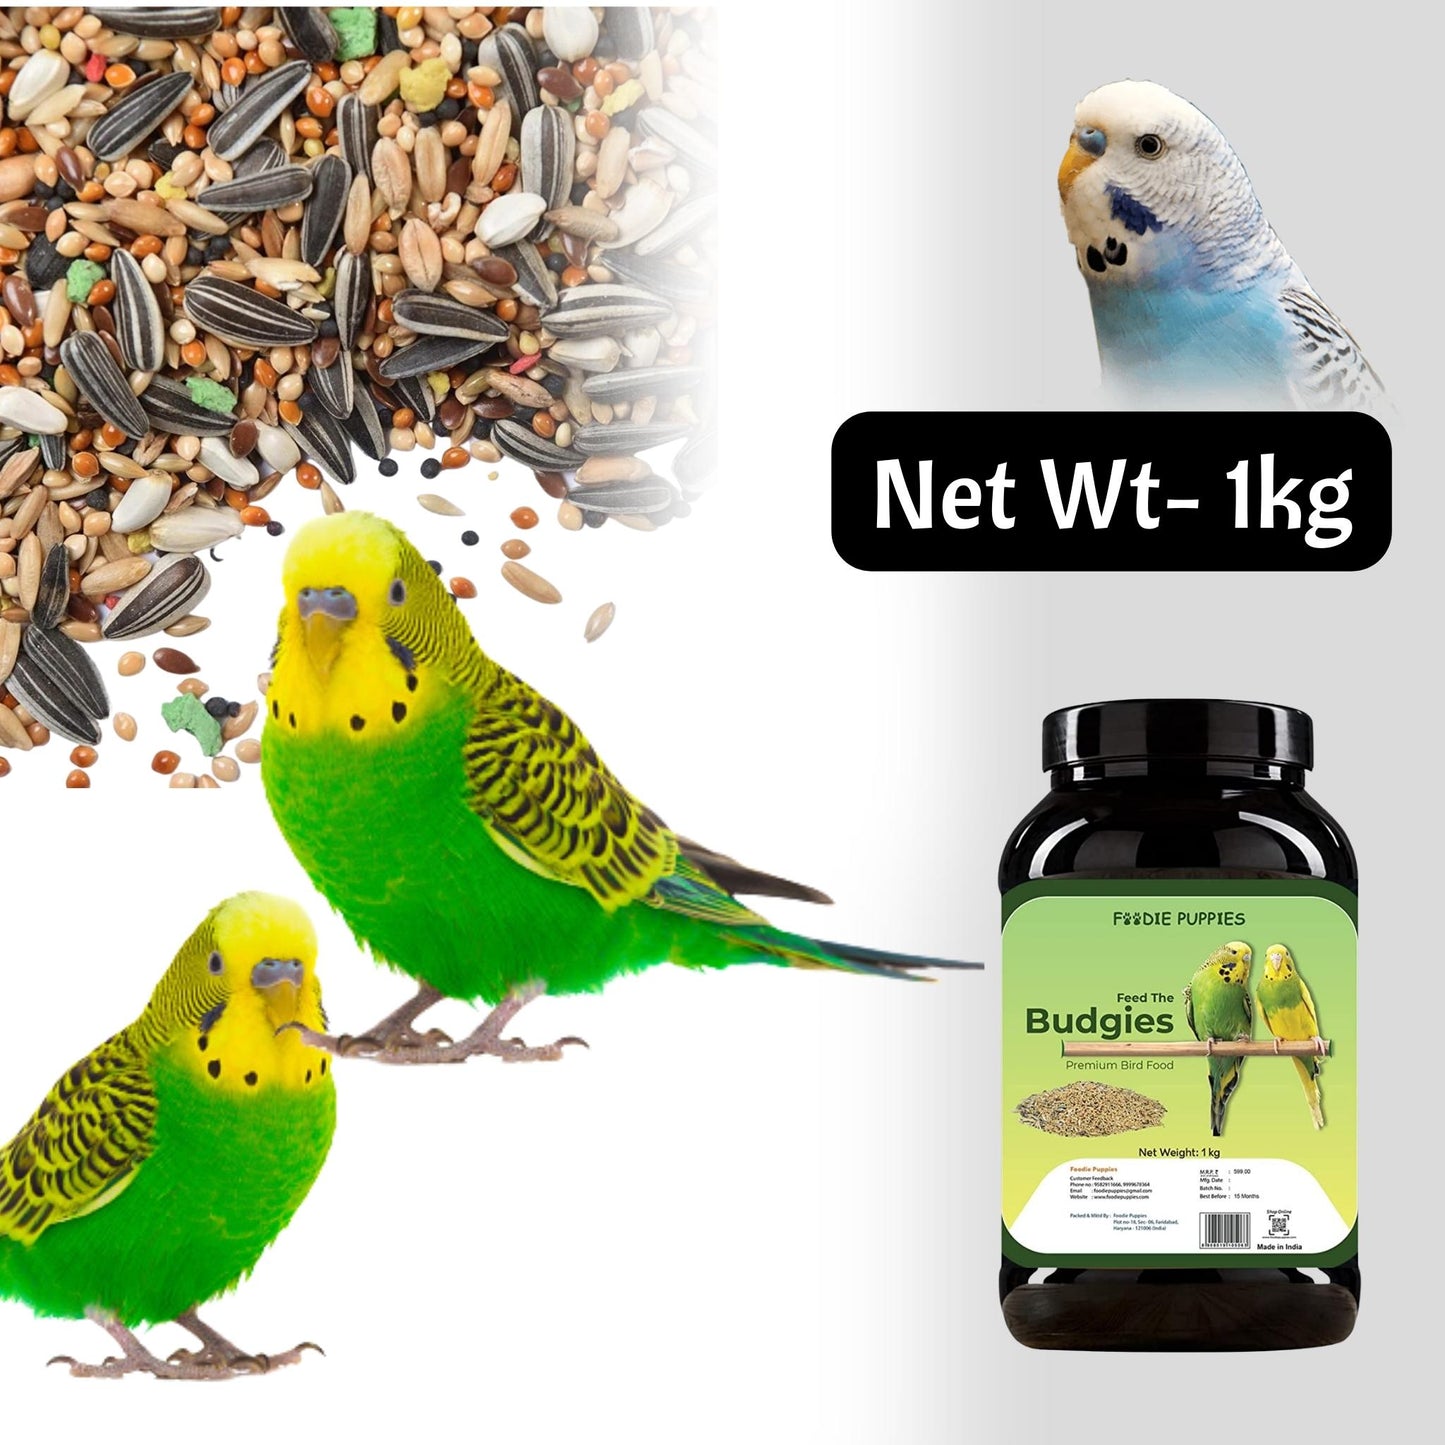 Foodie Puppies Budgie Mix Seeds - 1Kg | Suitable for All Type of Birds